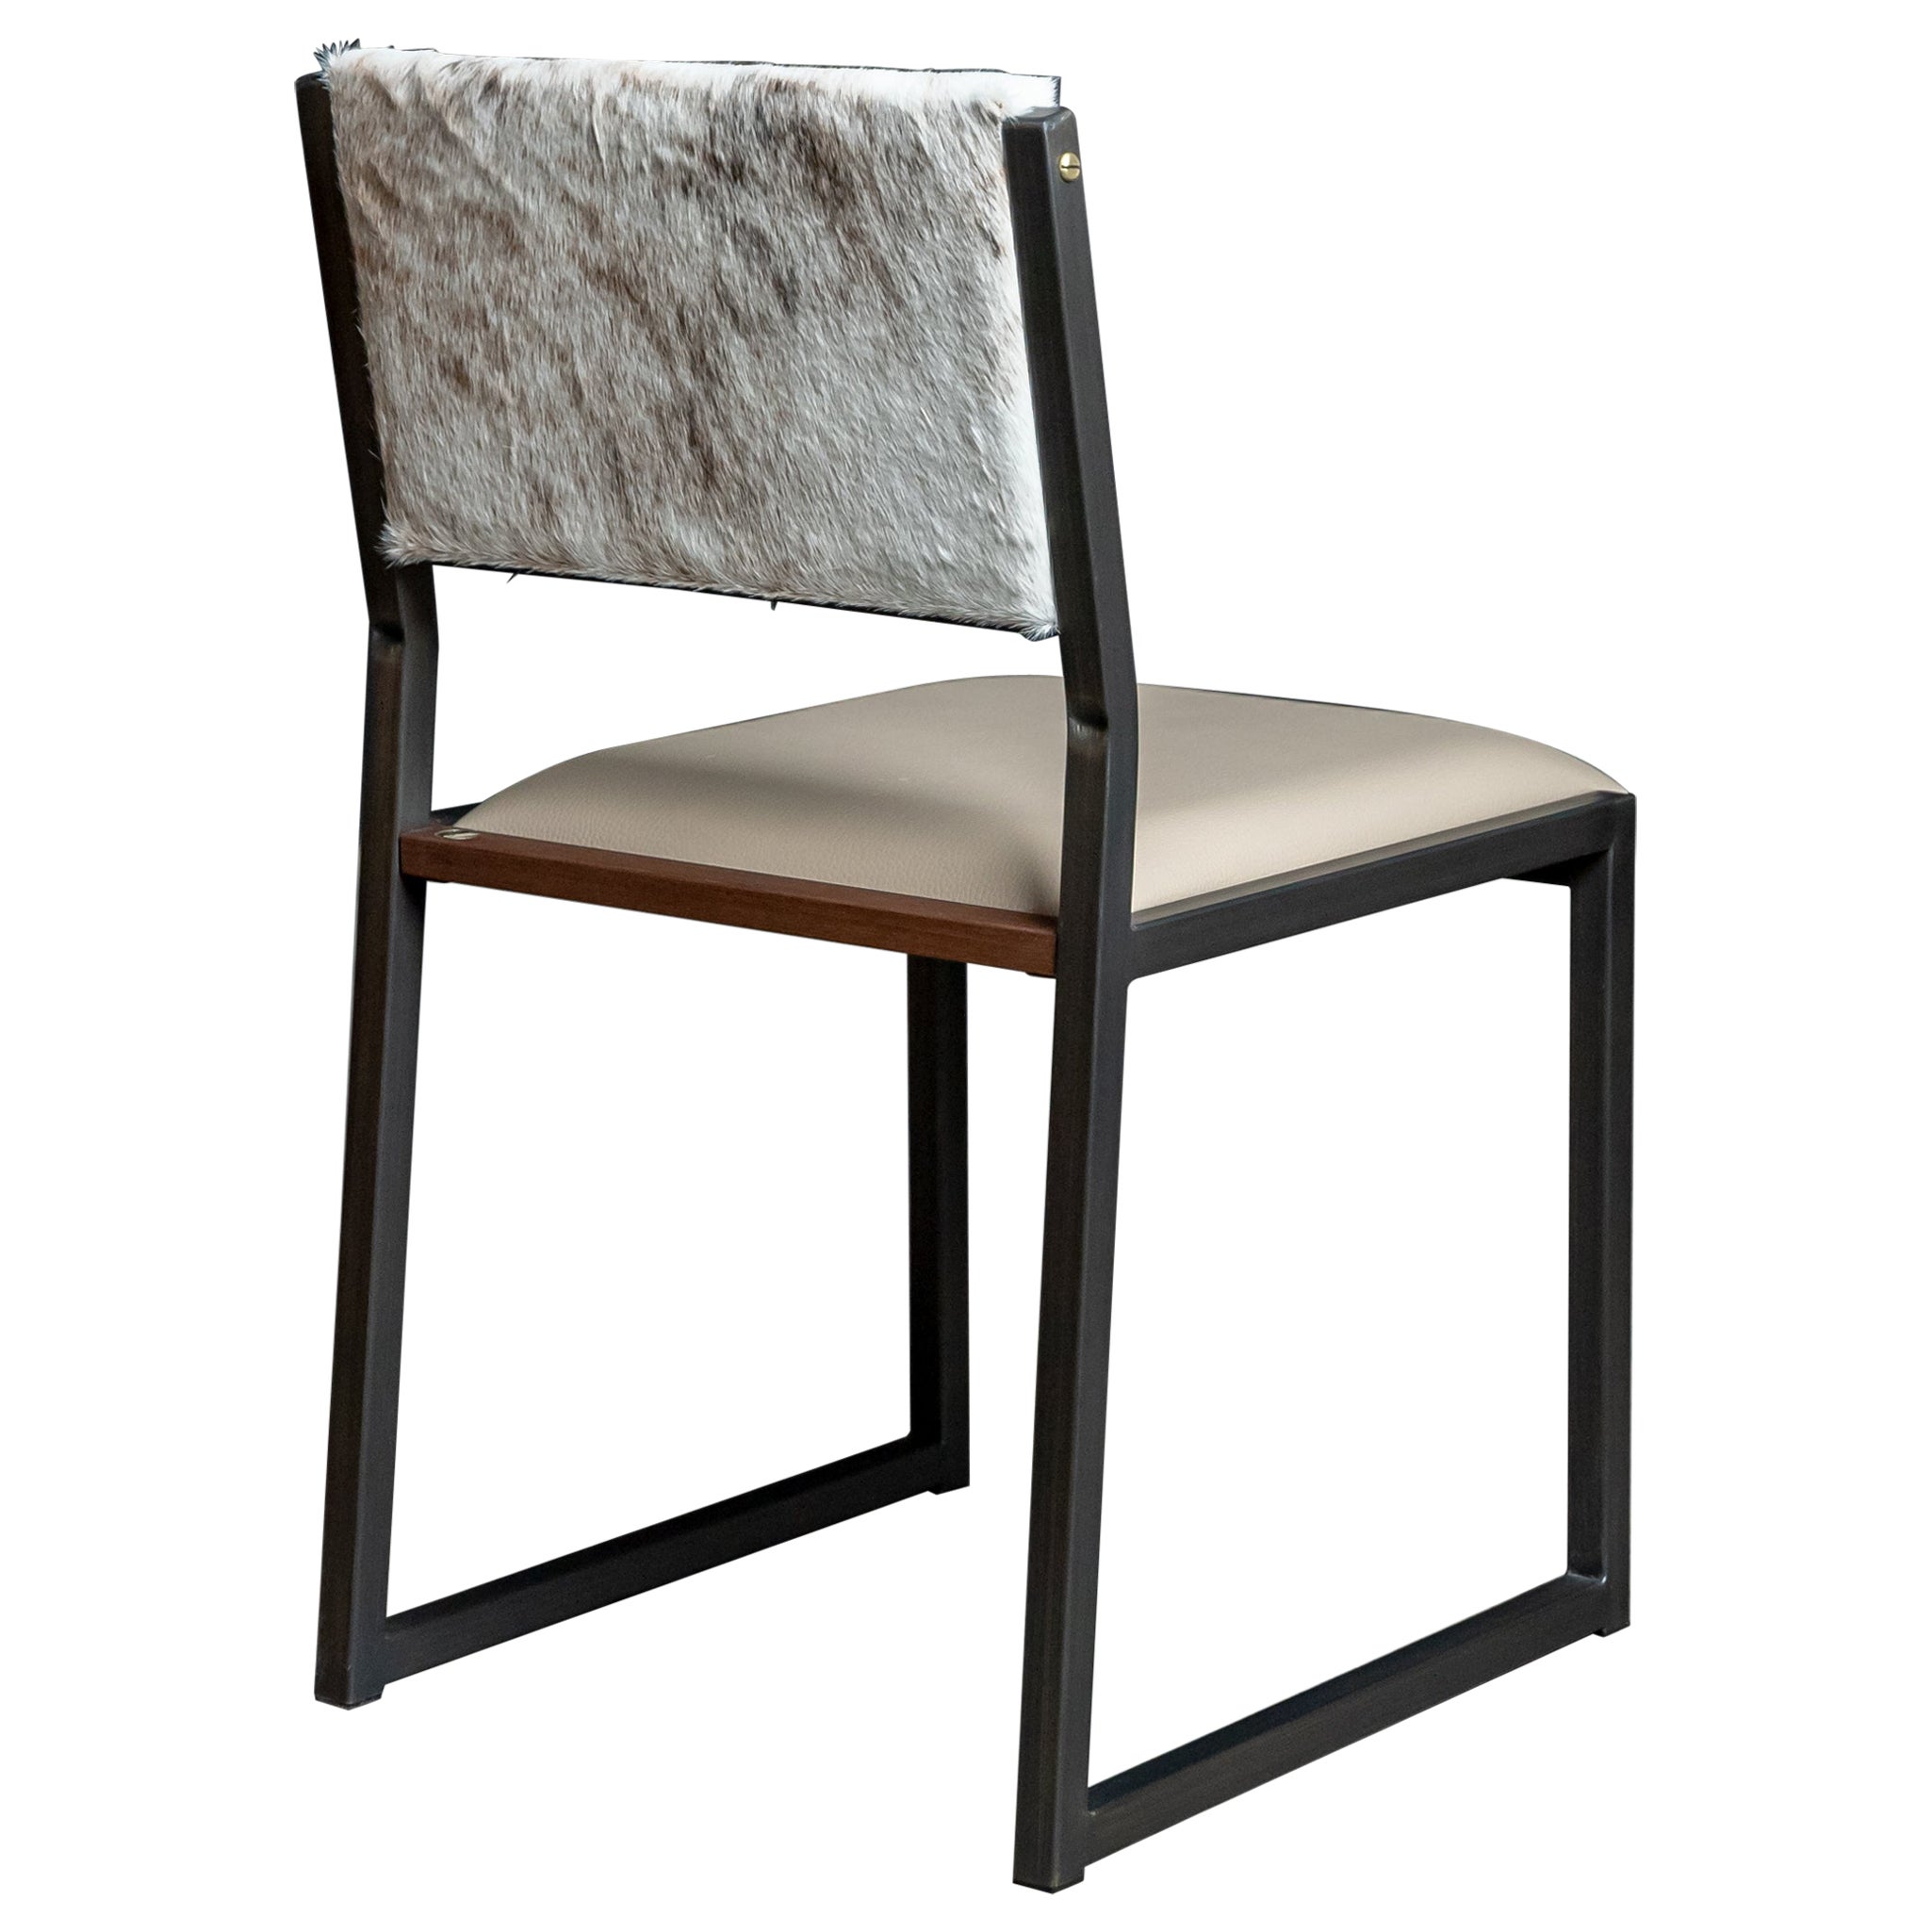 Shaker Modern Chair, Brushed Bronze, Walnut, Sand Leather, Light Brindle Cowhide